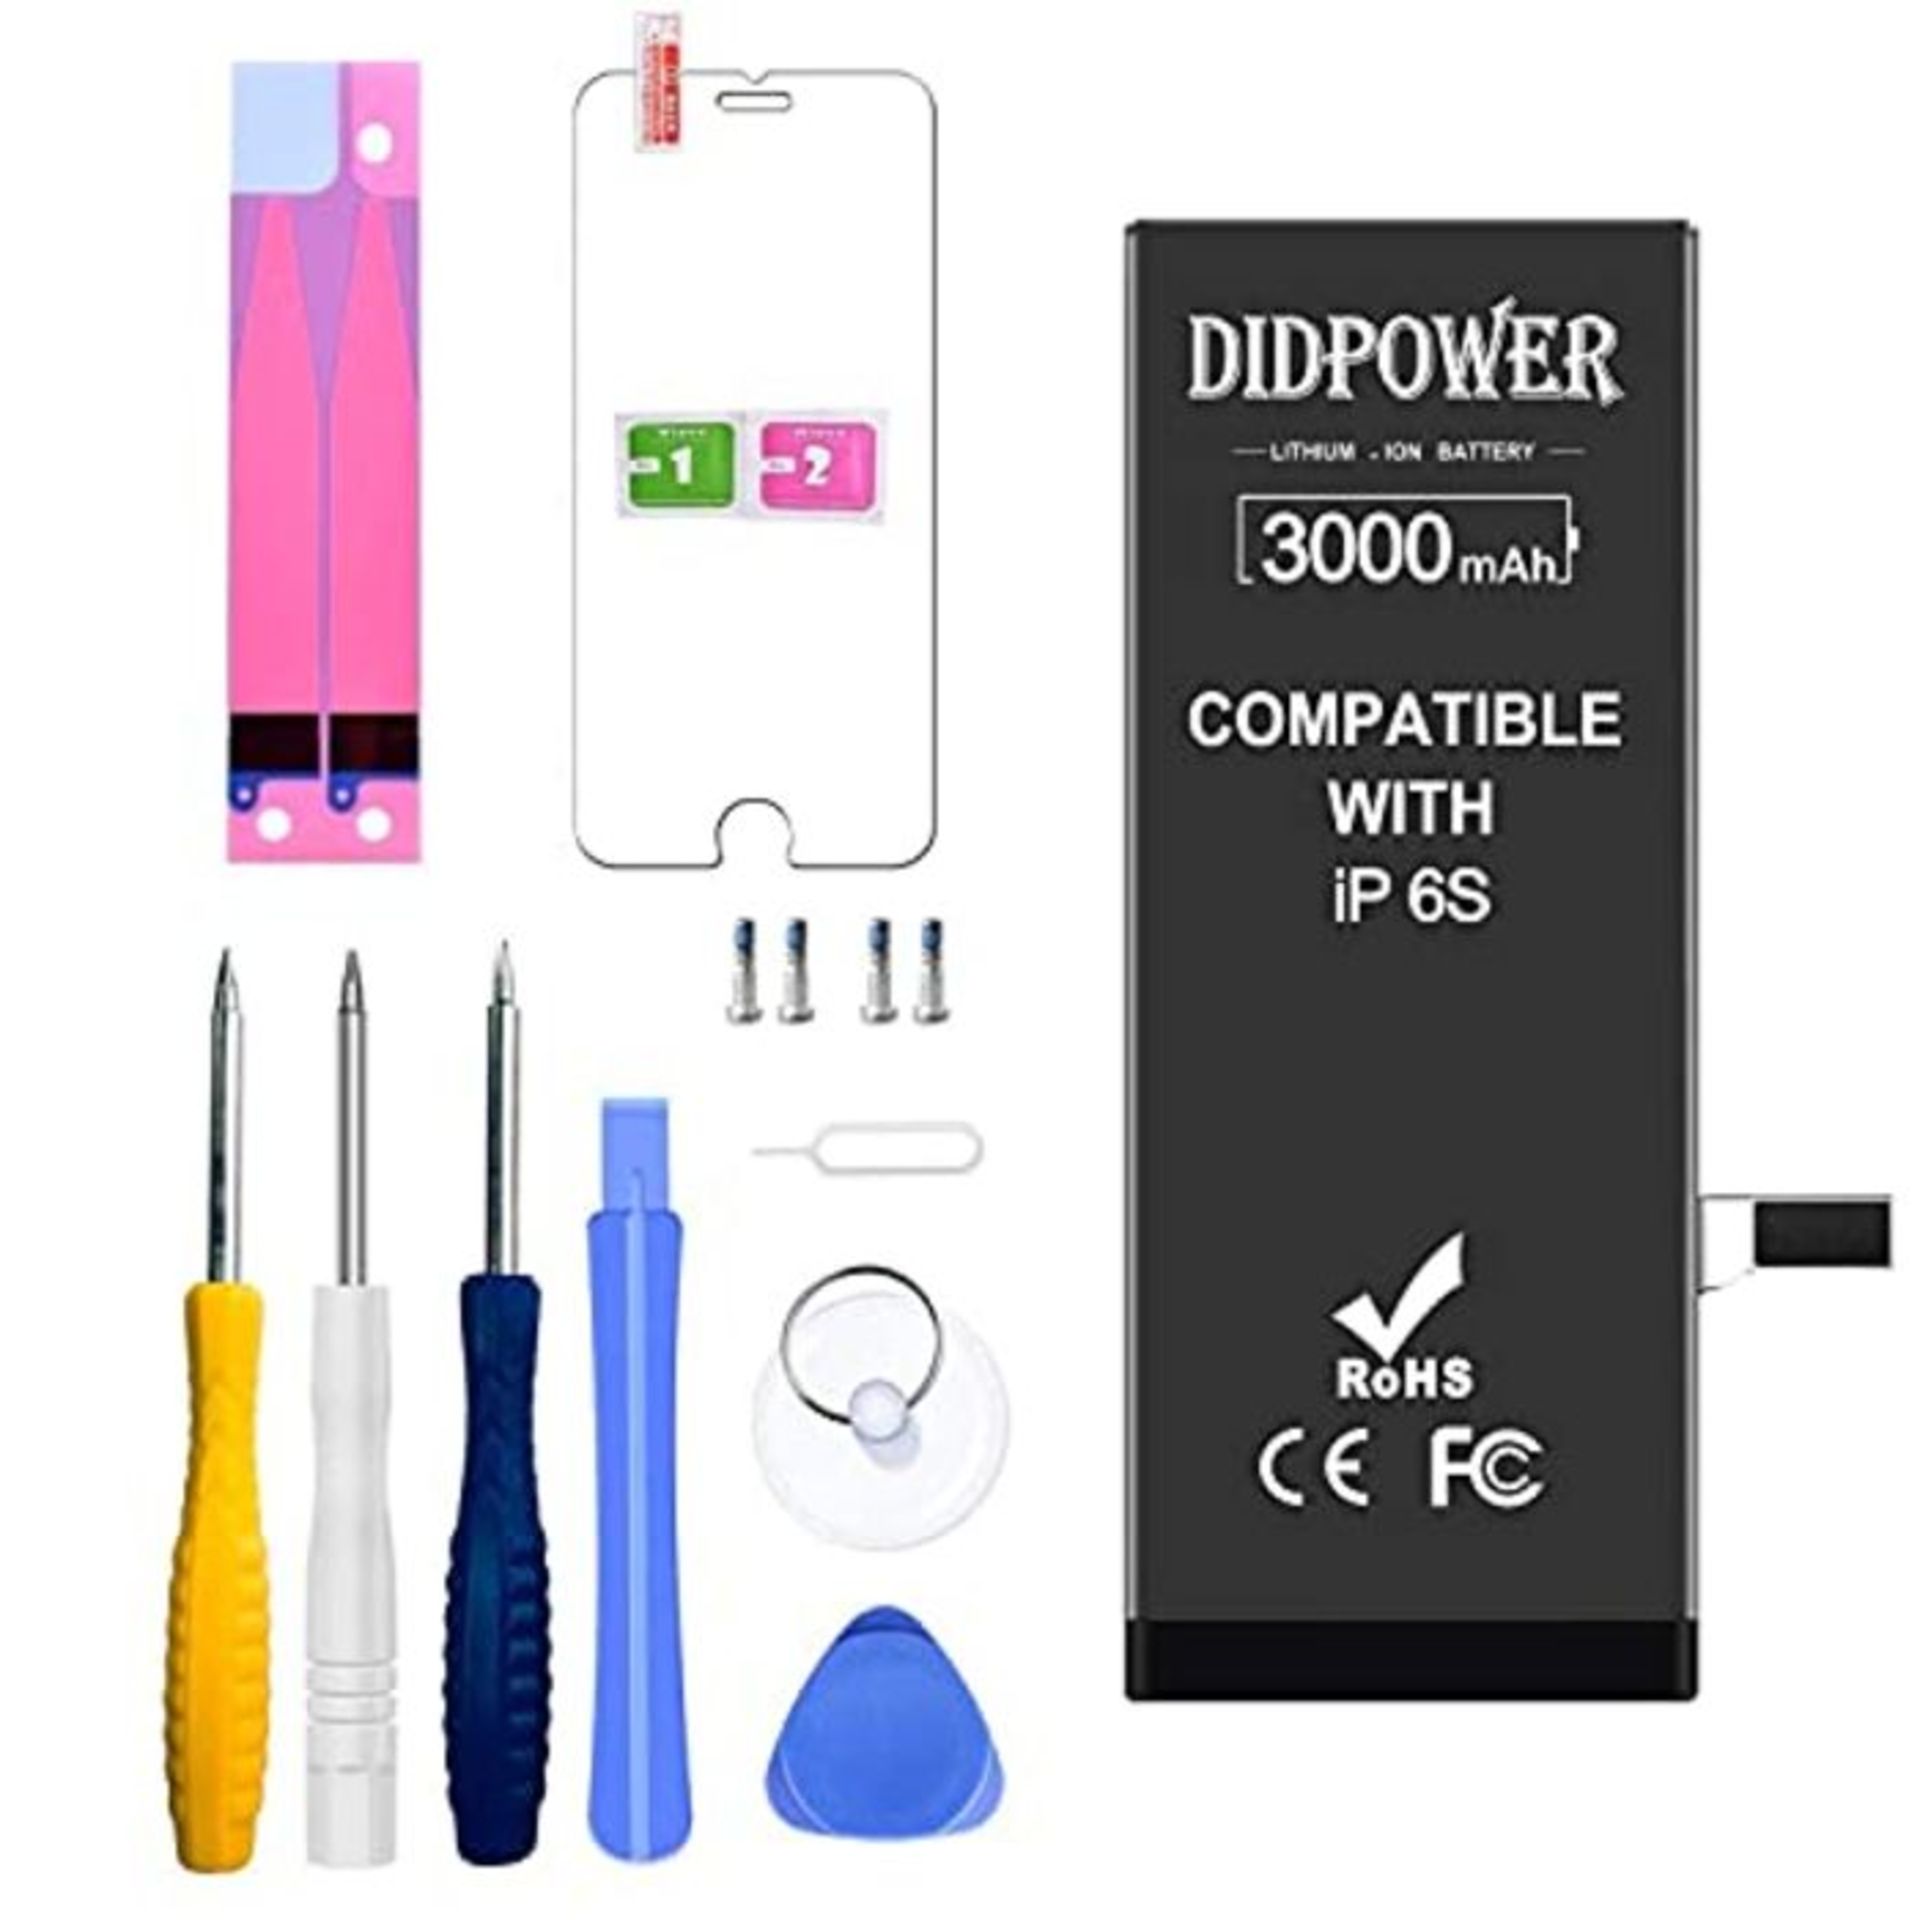 Didpower [Super Capacity] Battery Replacement Compatible With iPhone 6S 3000mAh With R